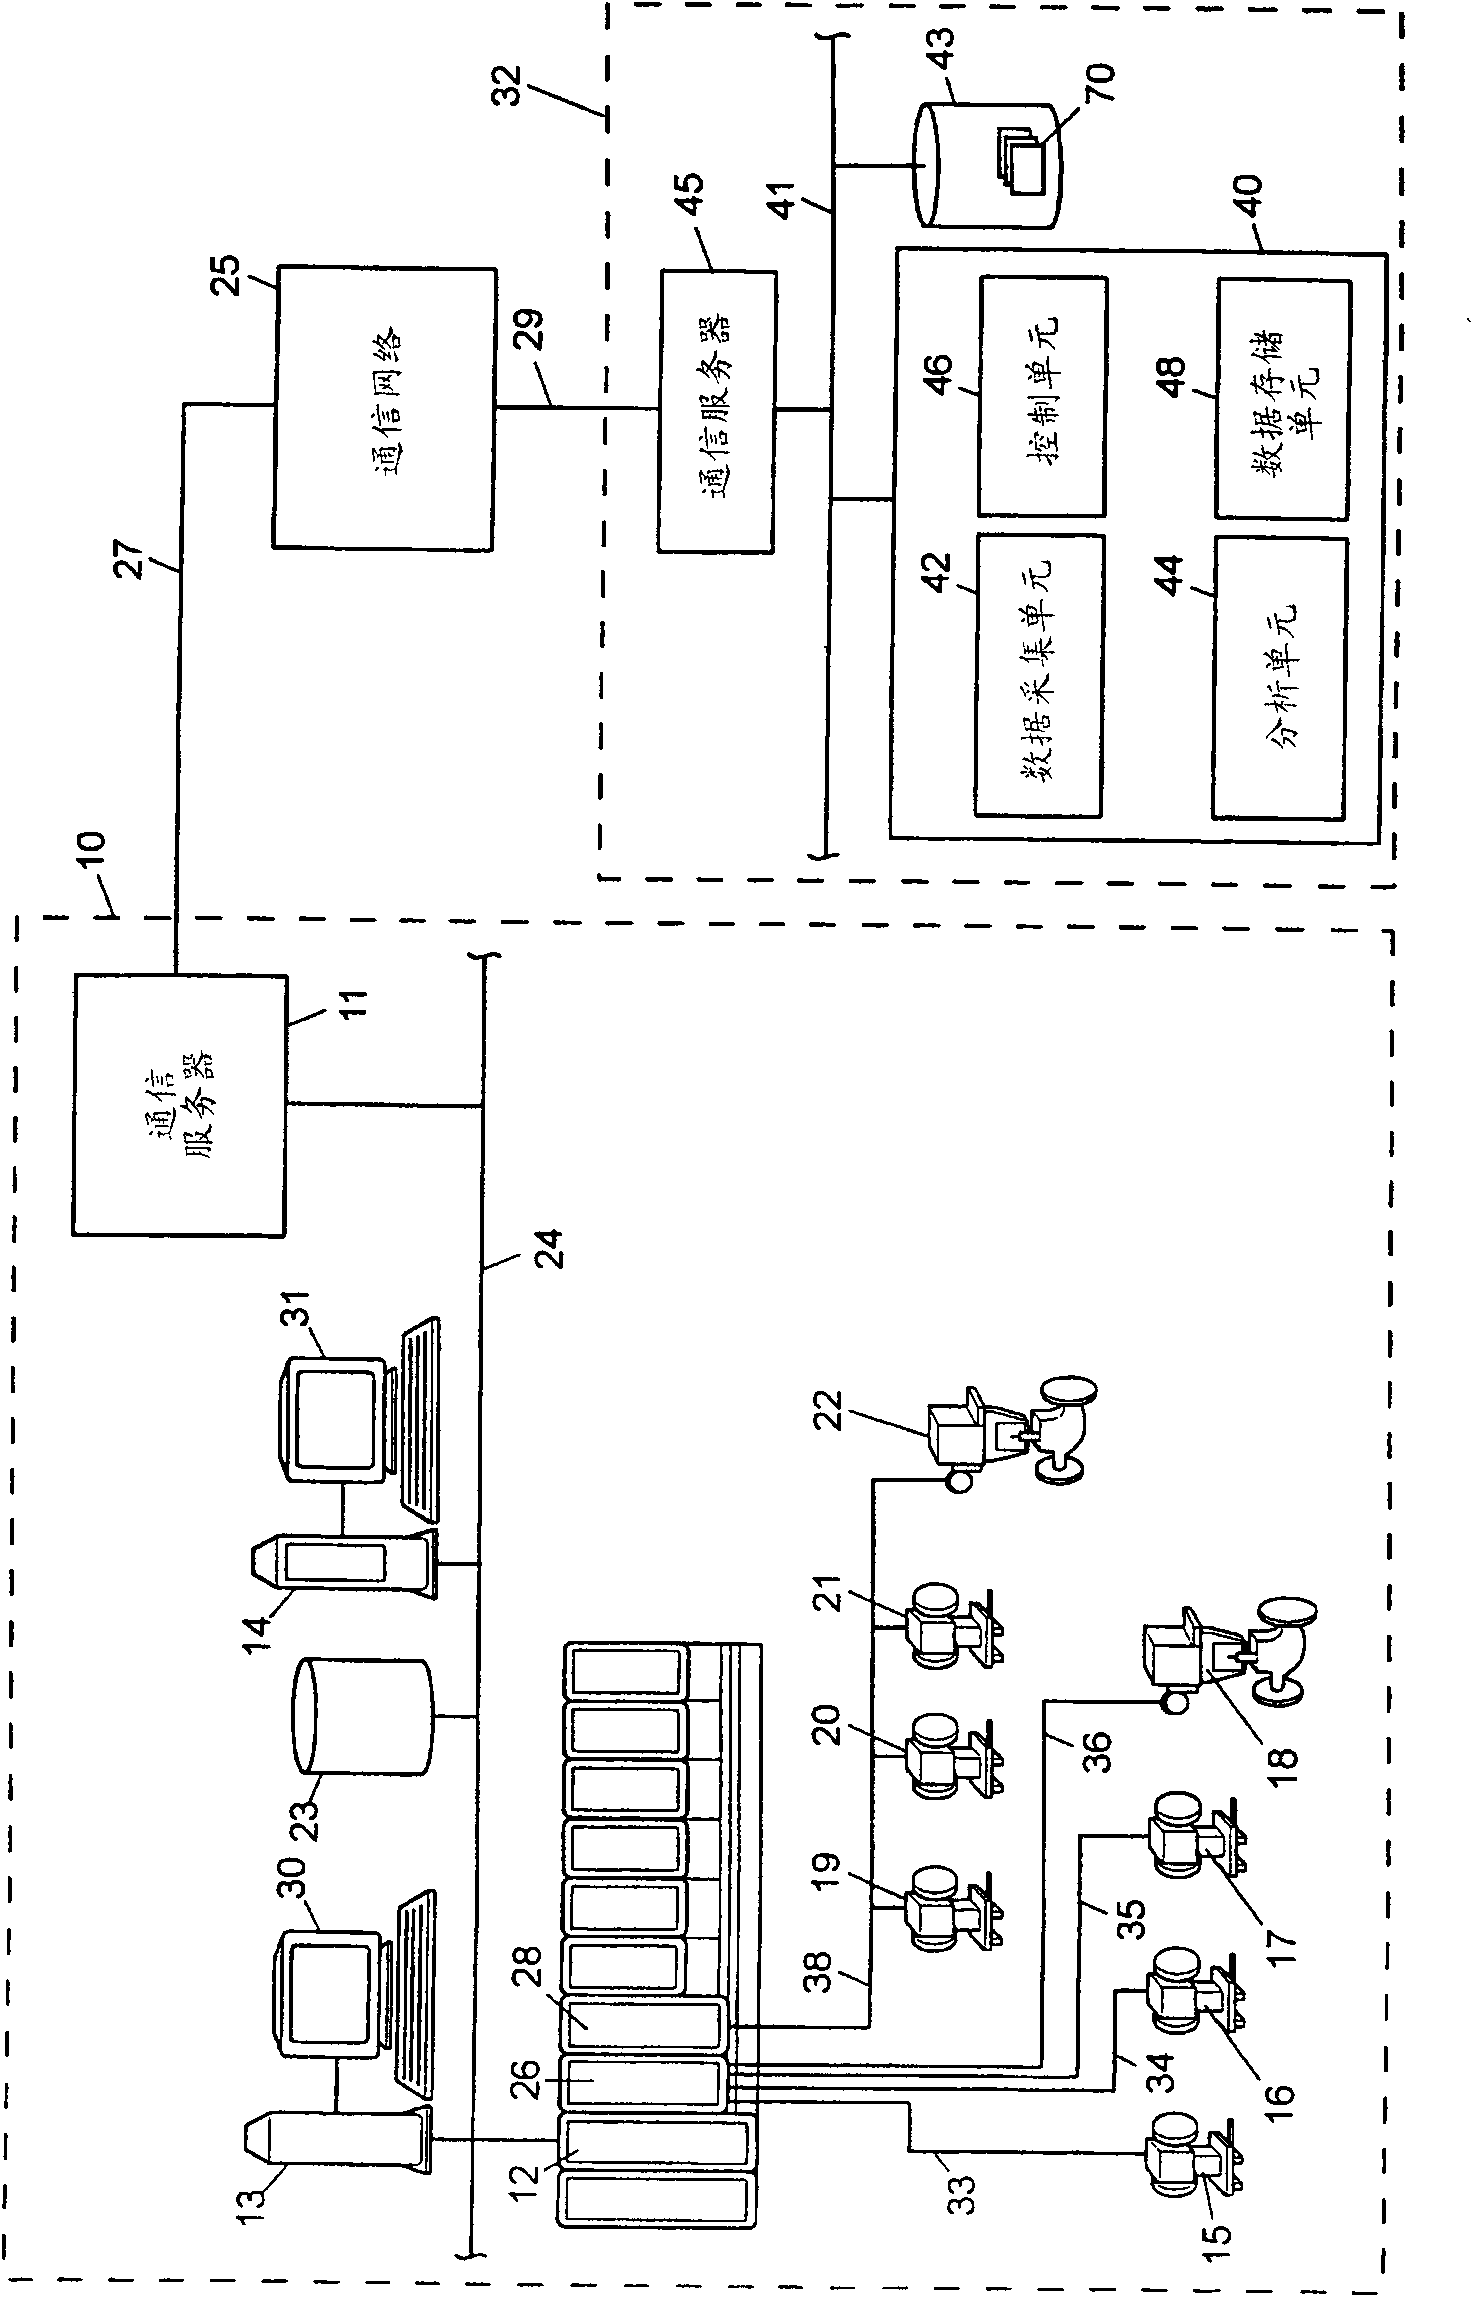 Service facility for providing remote diagnostic and maintenance services to a process plant